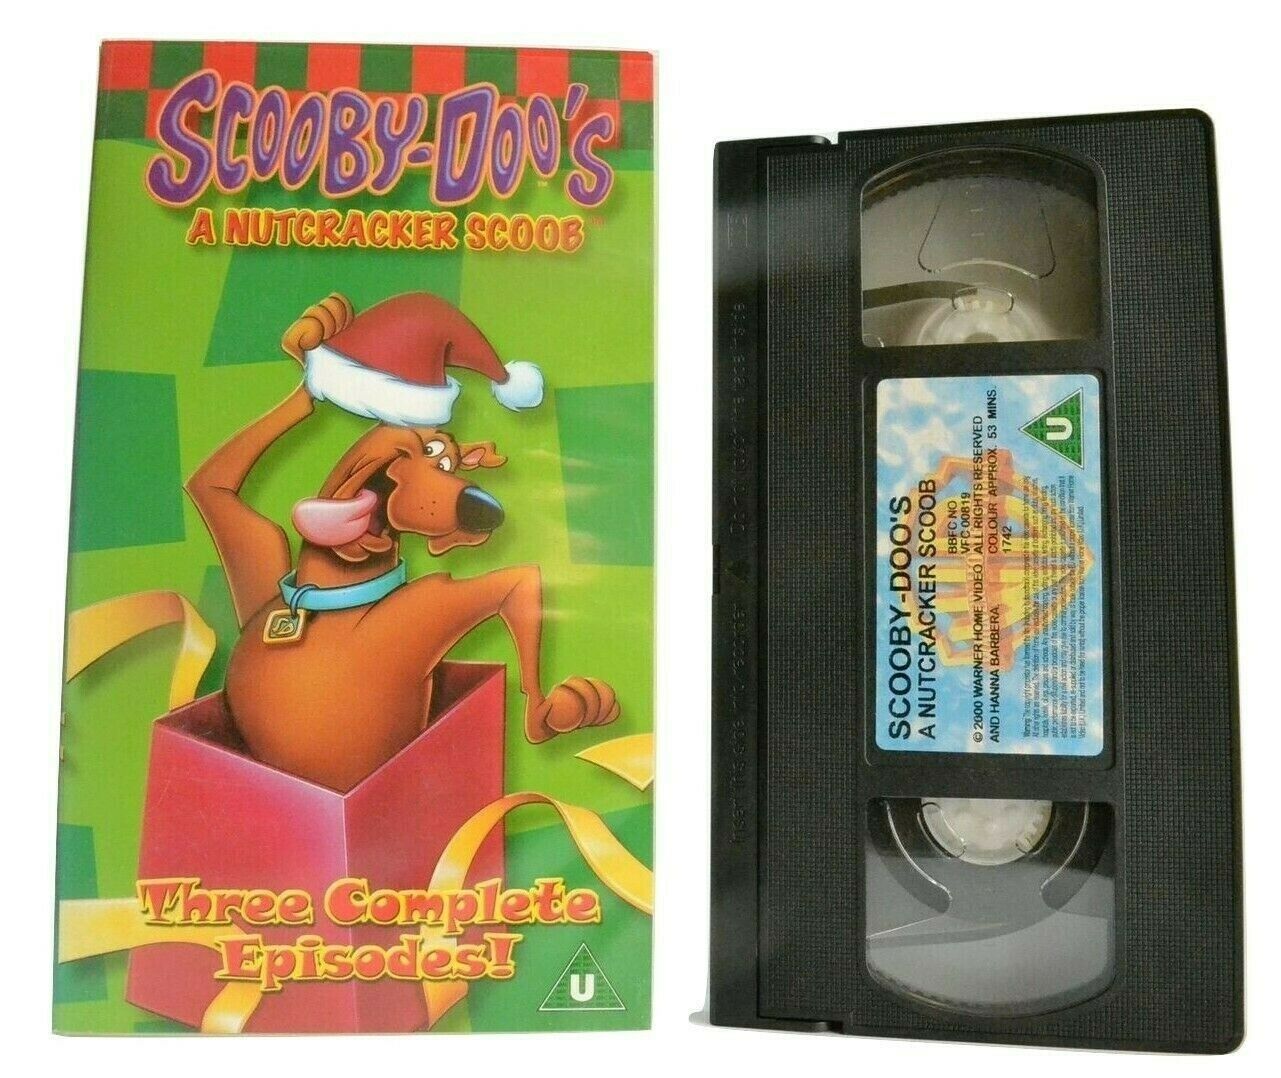 Scooby-Doo: A Nutcracker Scoob - Animated - Ghost Adventures - Children's - VHS-